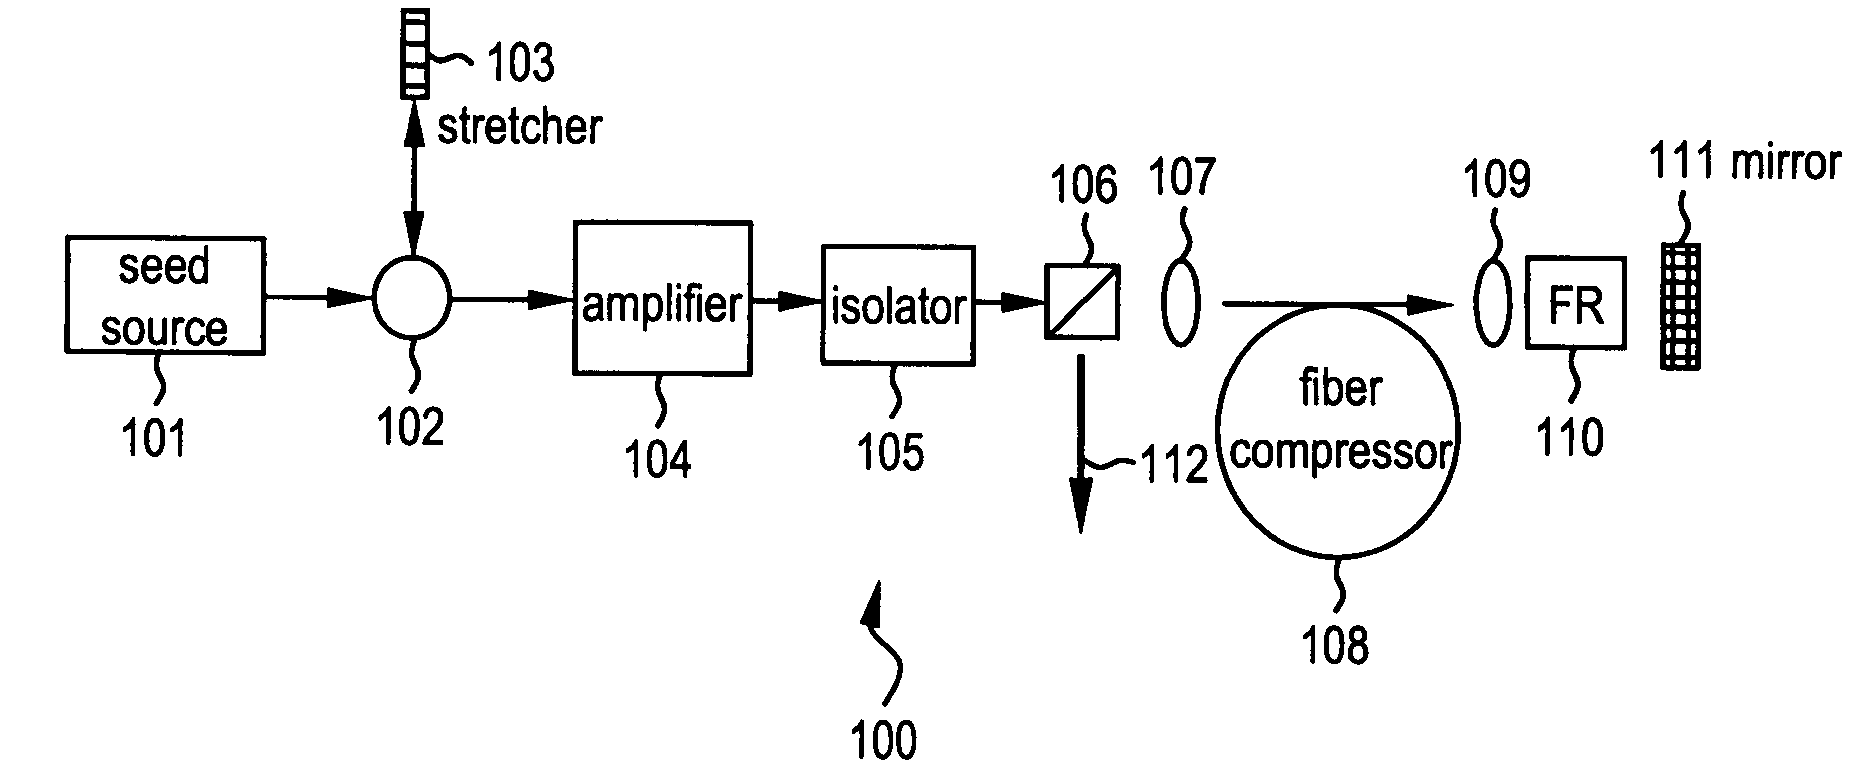 All-fiber chirped pulse amplification systems